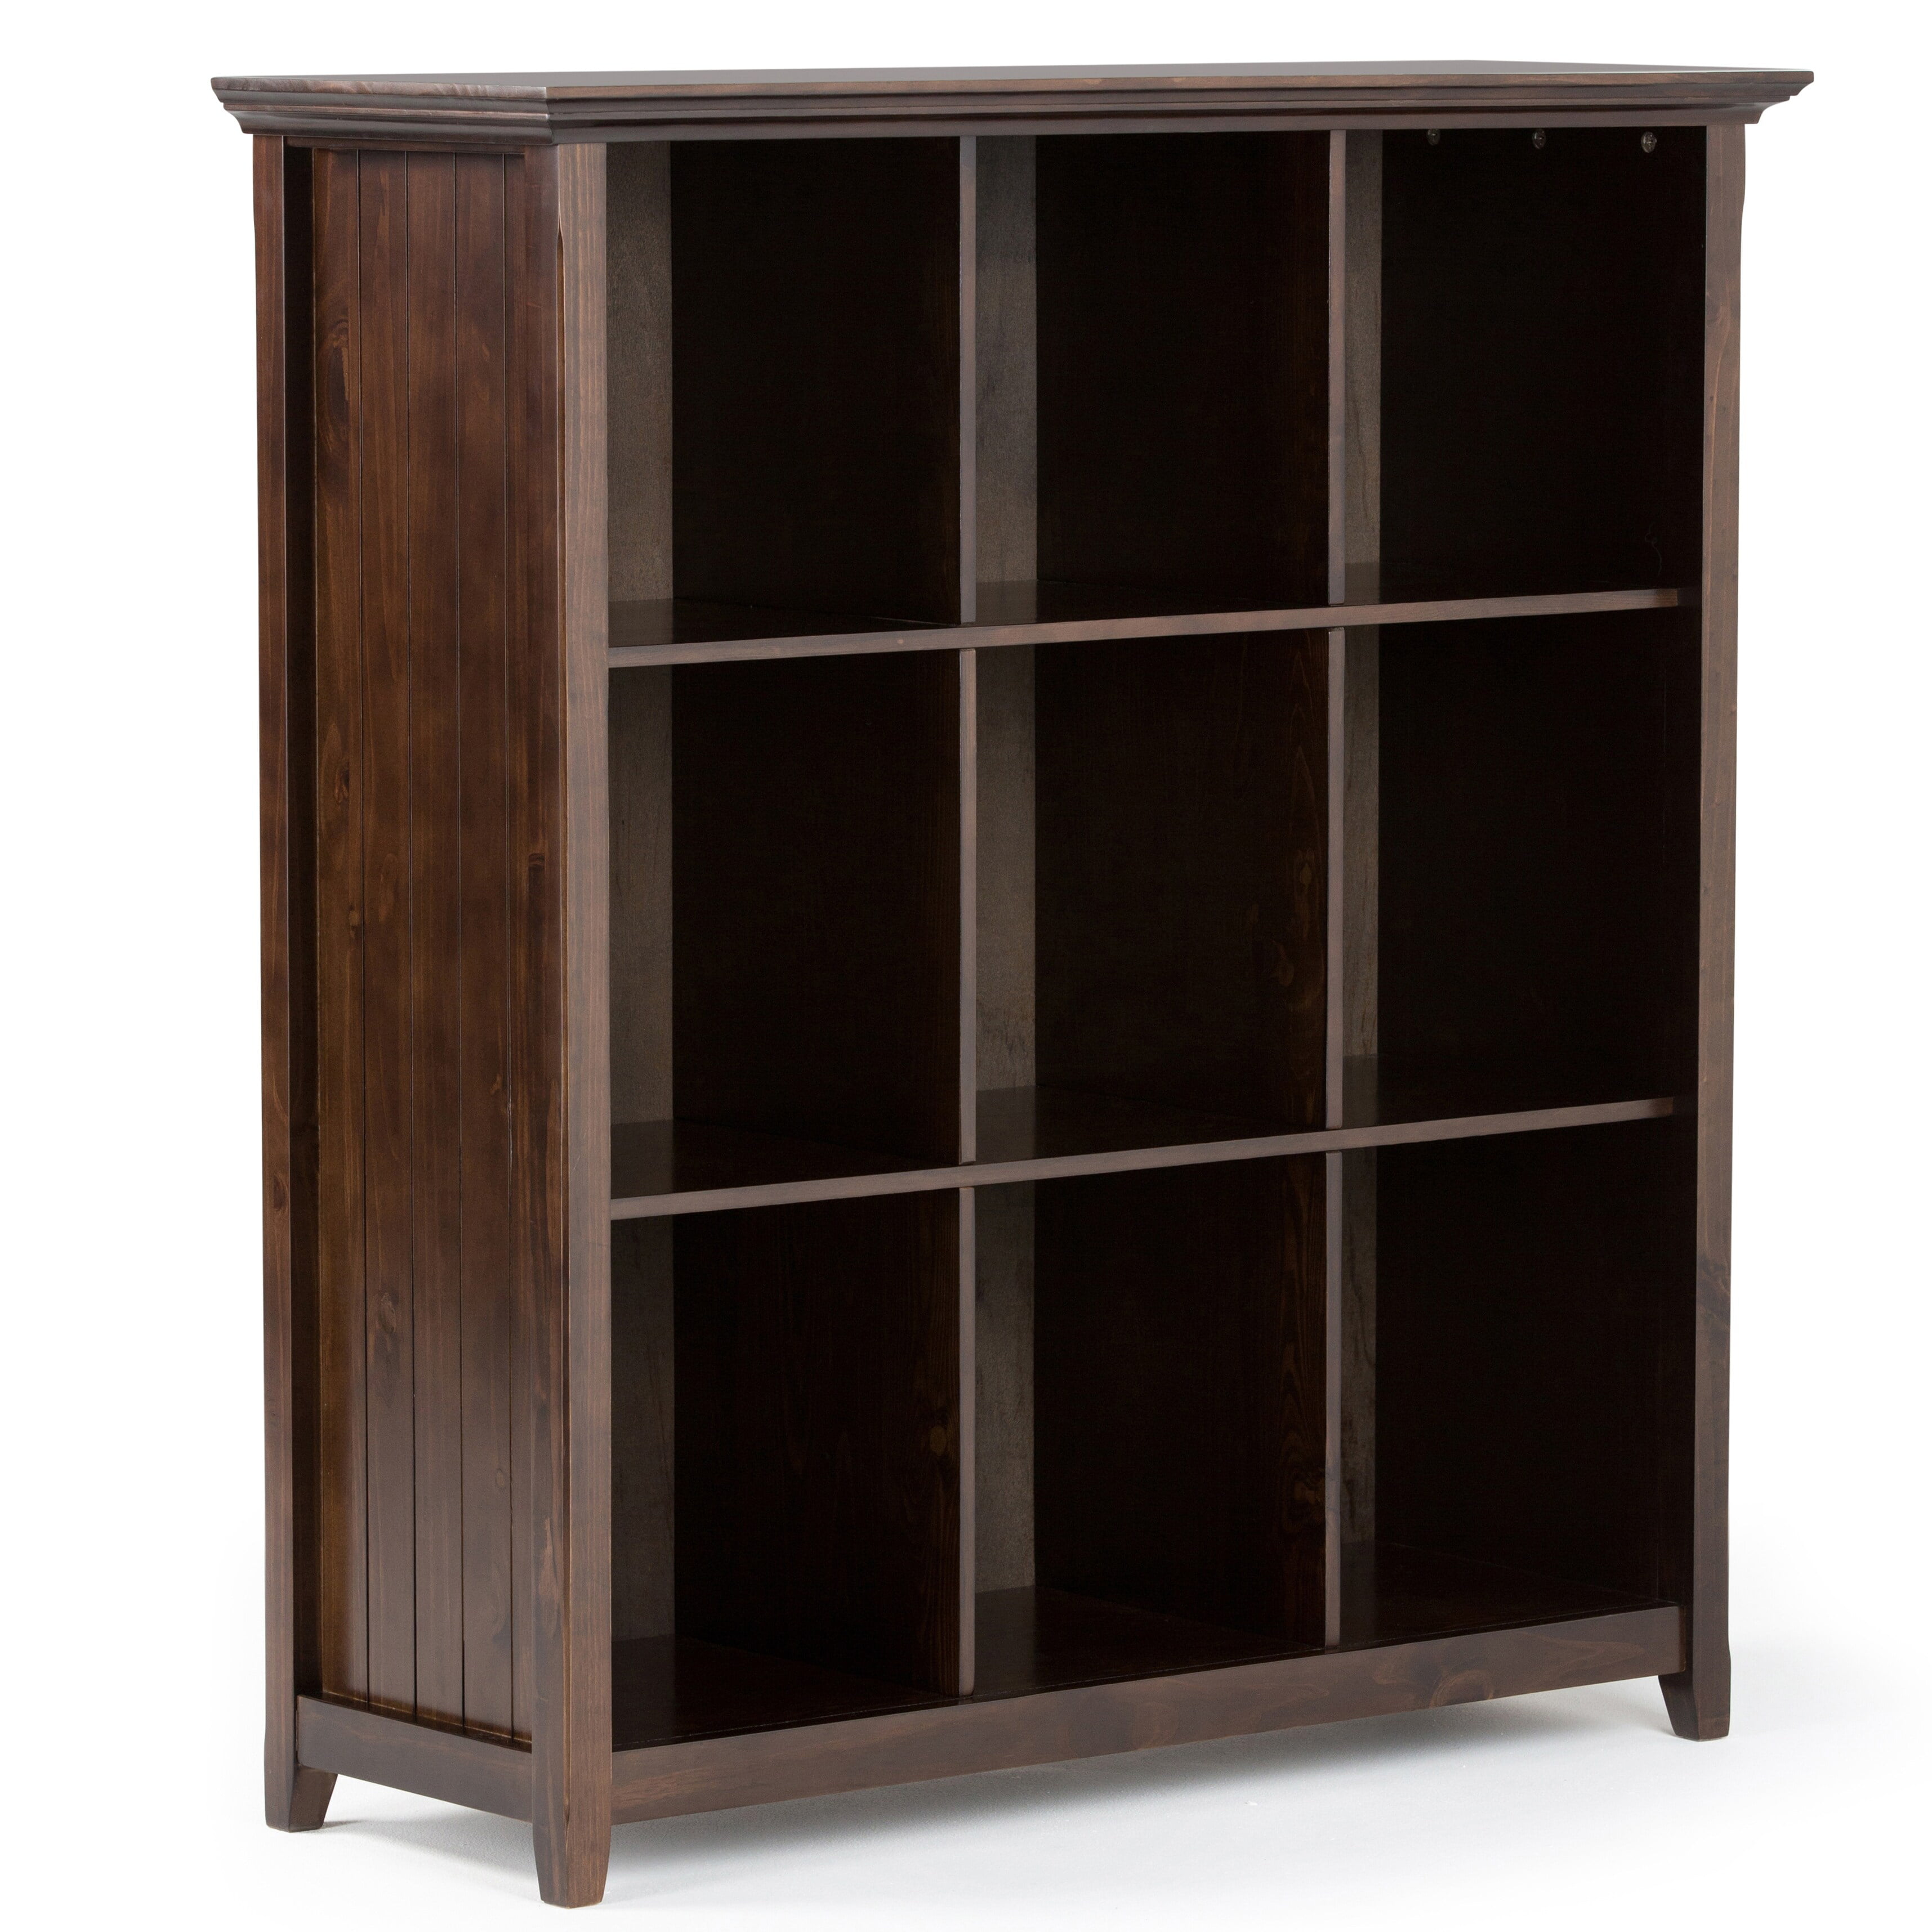 Minimalist 48 Inch Wide Bookcase for Large Space